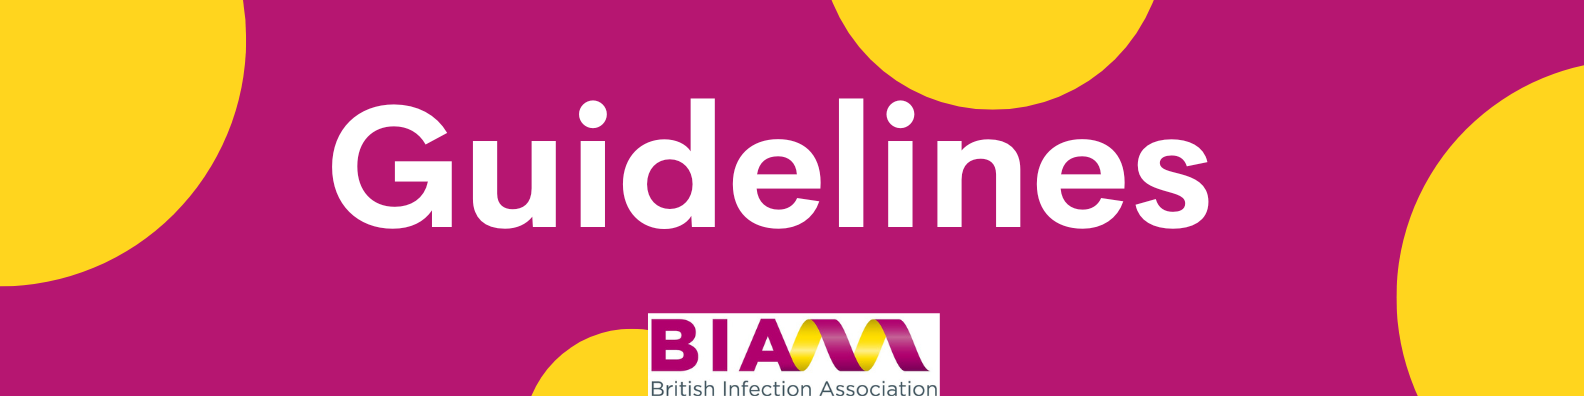 BIA Website Banners  (3).png